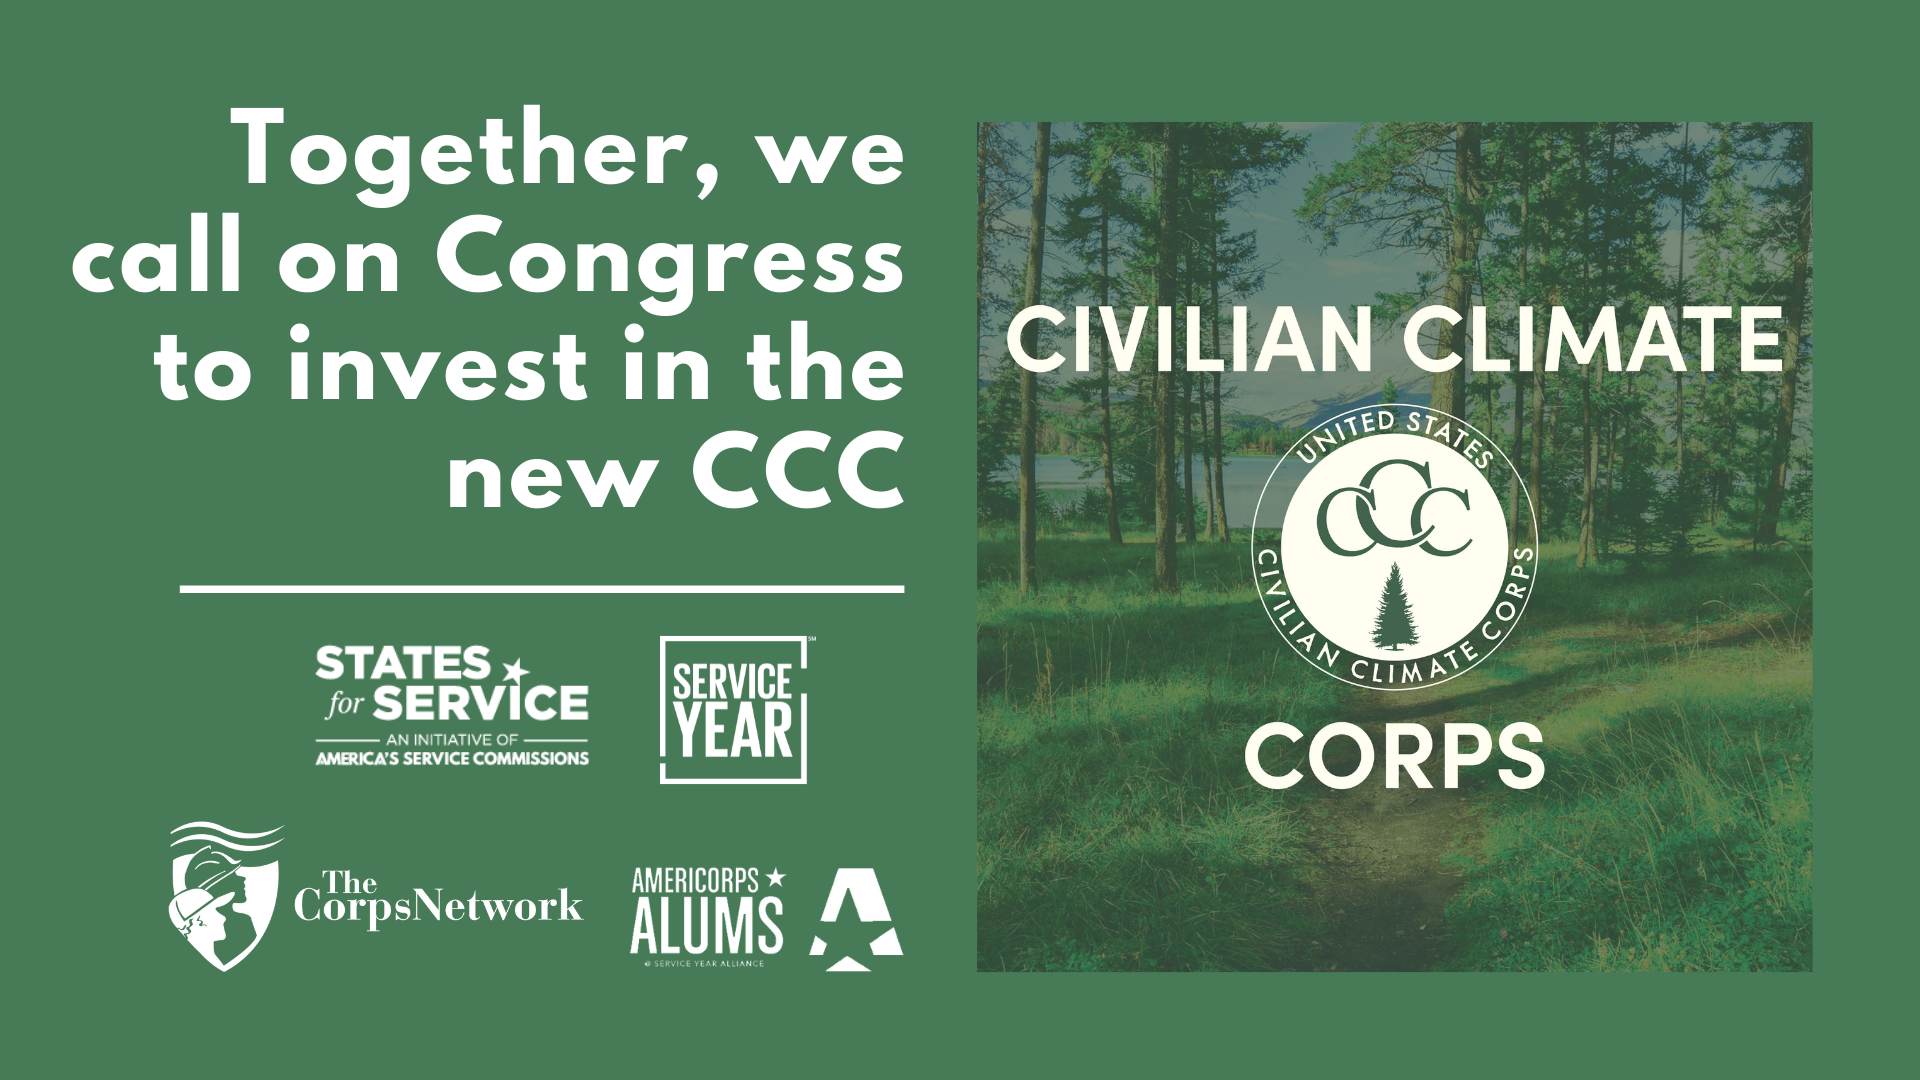 Green graphic with white text that reads Together, we call on Congress to invest in the new CCC: Civilian Climate Corps. Includes States for Service logo, Service Year logo, The Corps Network logo, AmeriCorps Alums logo, and CCC logo.